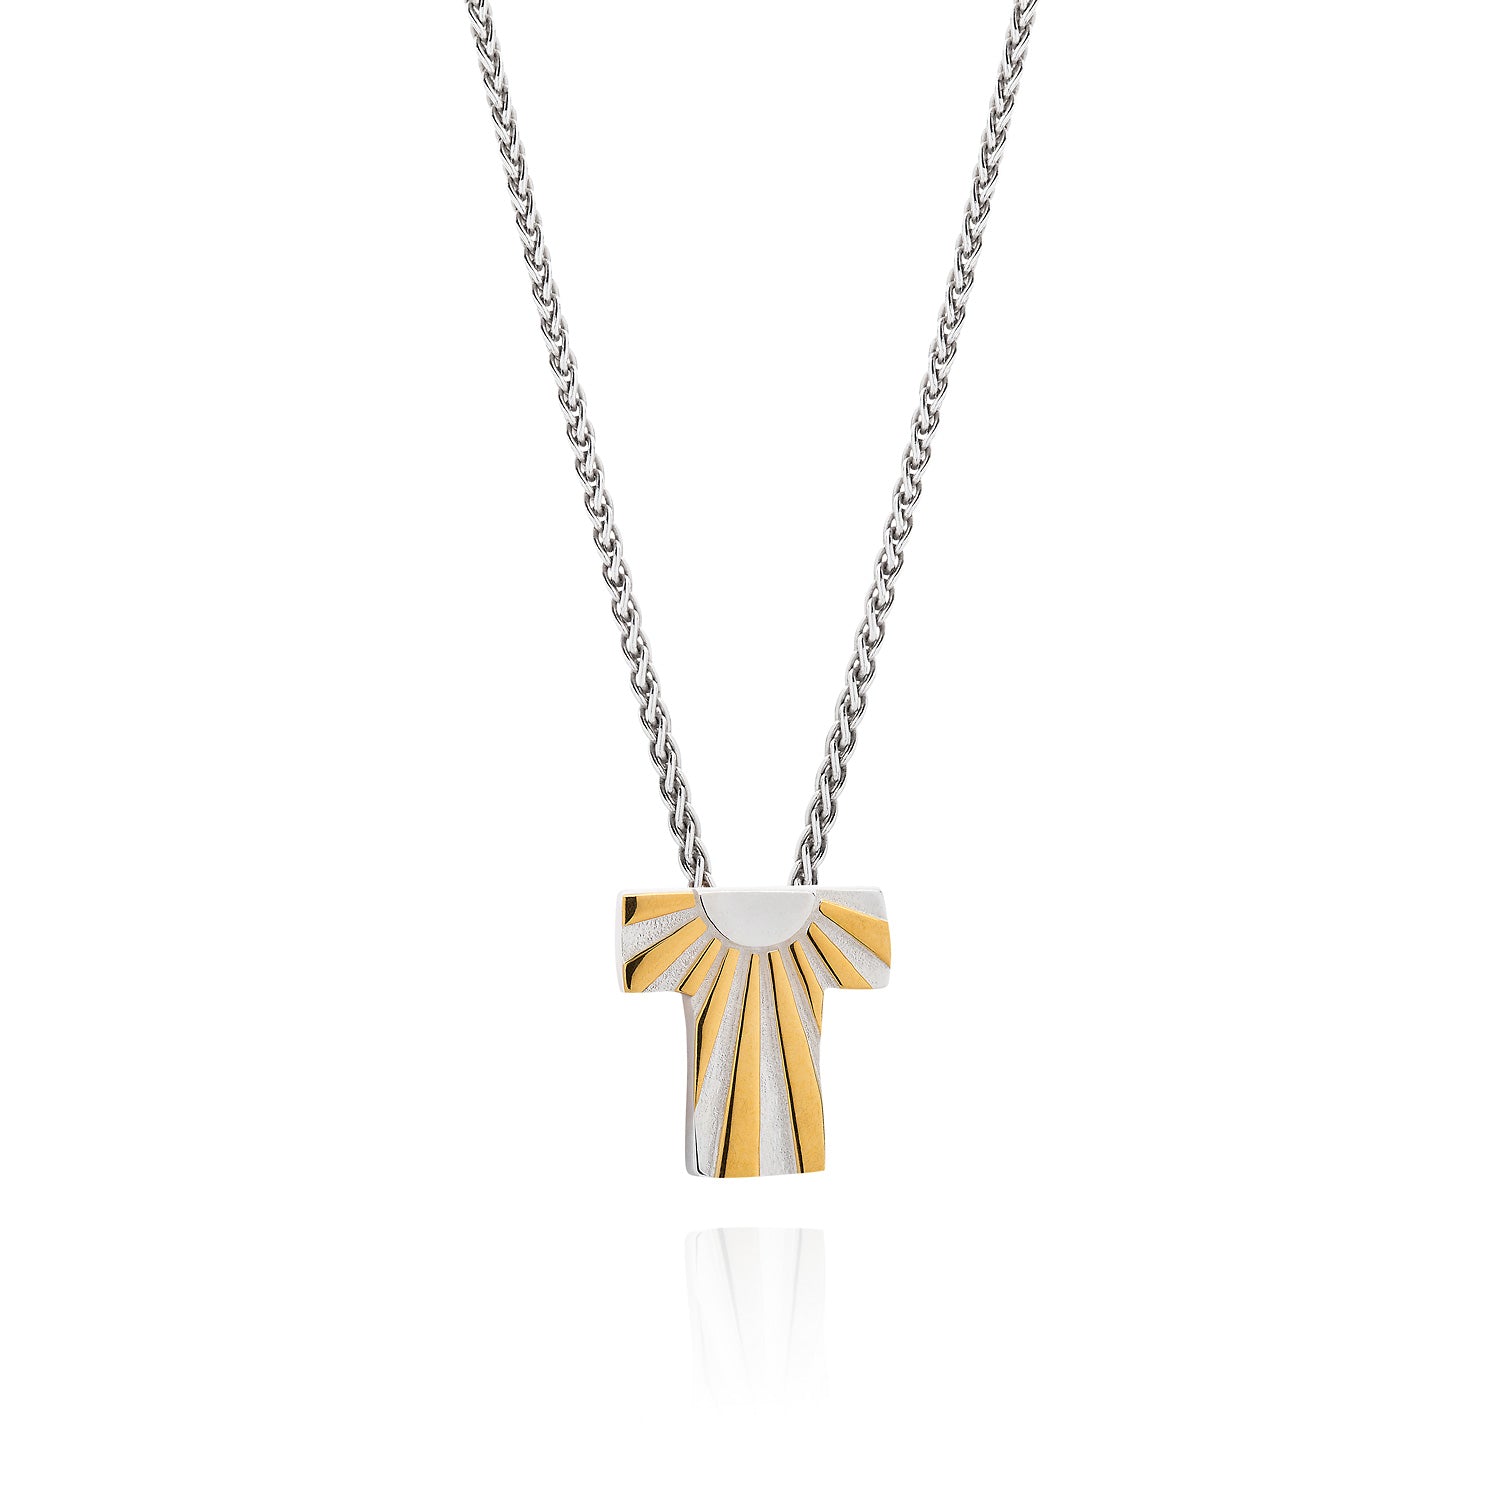 Art Deco Initial Silver Necklace by Yasmin Everley